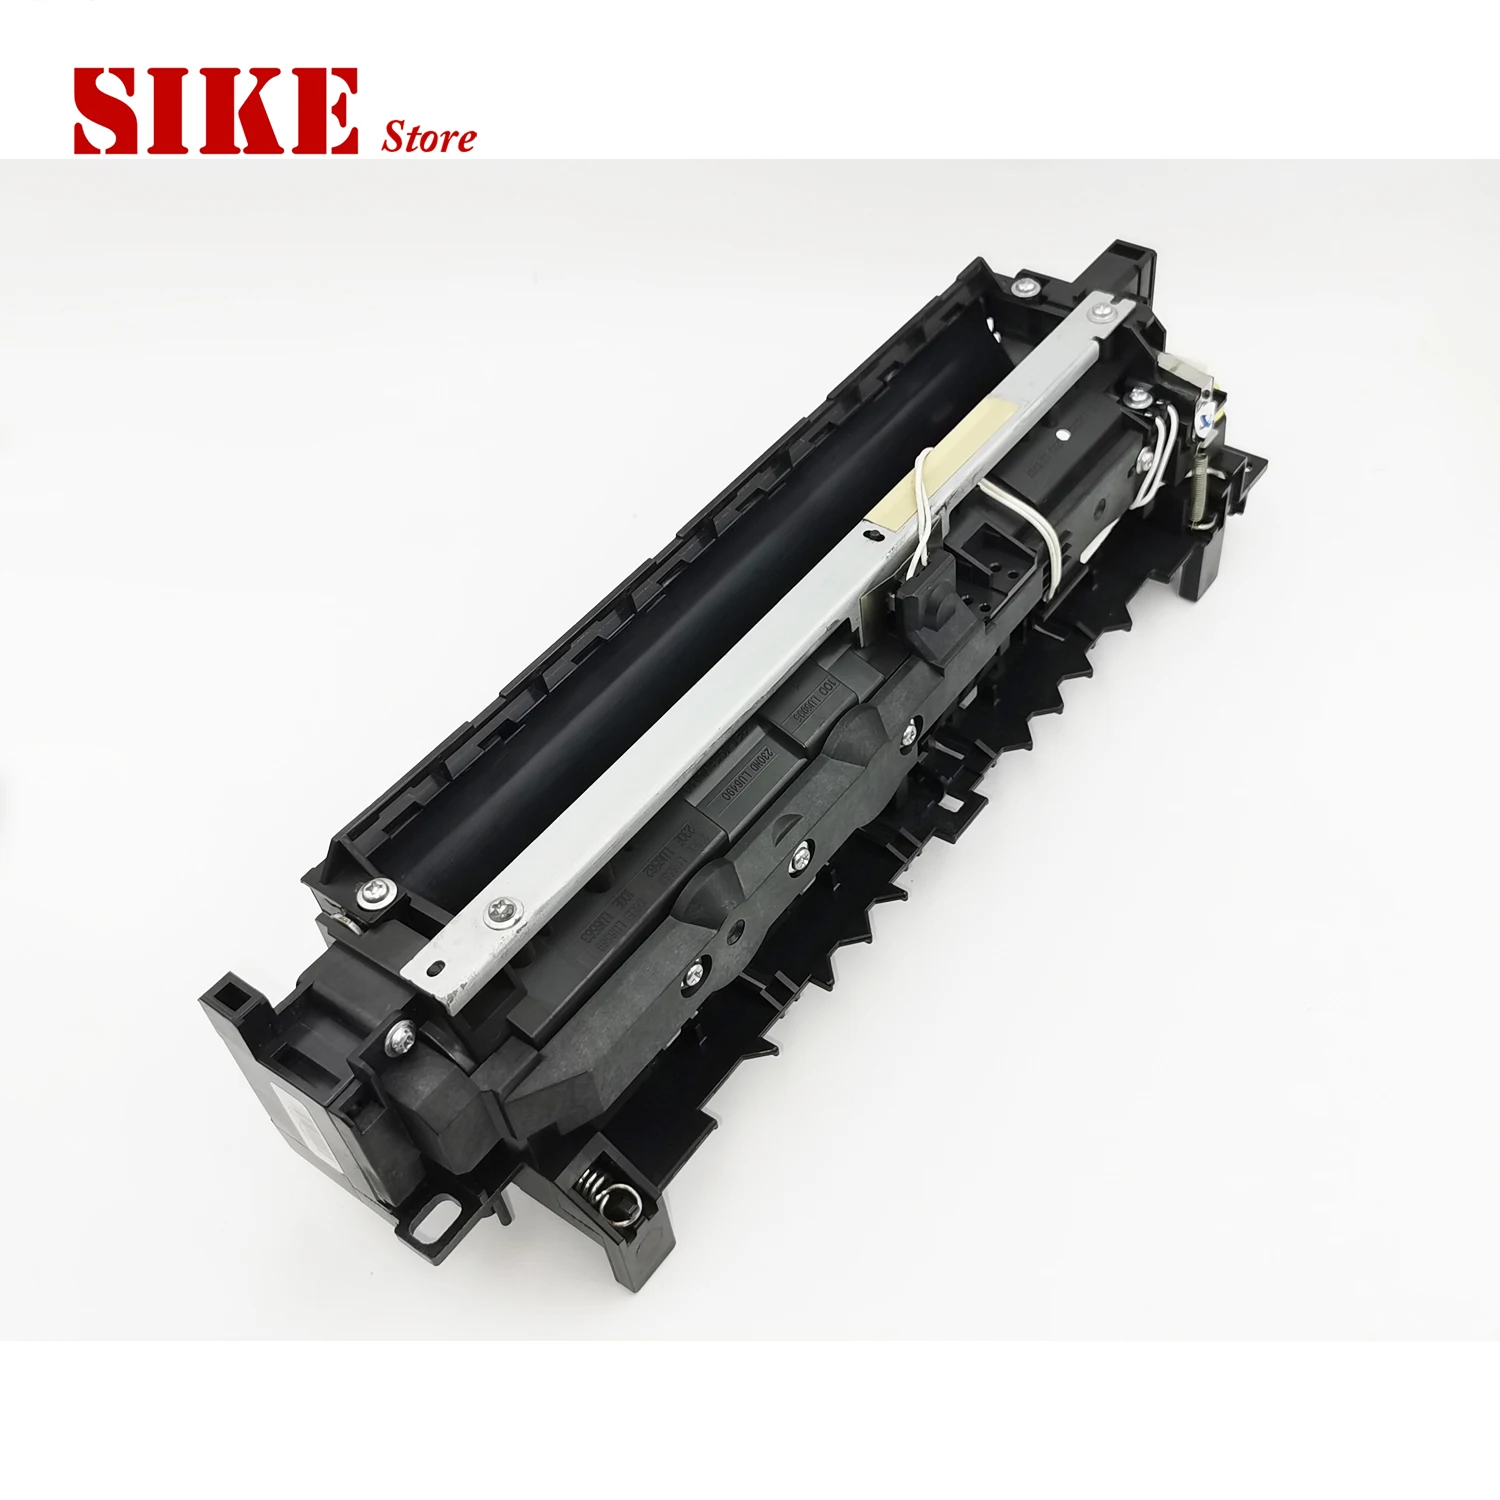 Assy  Brother DCP-9010CN DCP9010 MFC9010 DCP MFC 9010 Fuser Assembly LU5796001 LU5797001